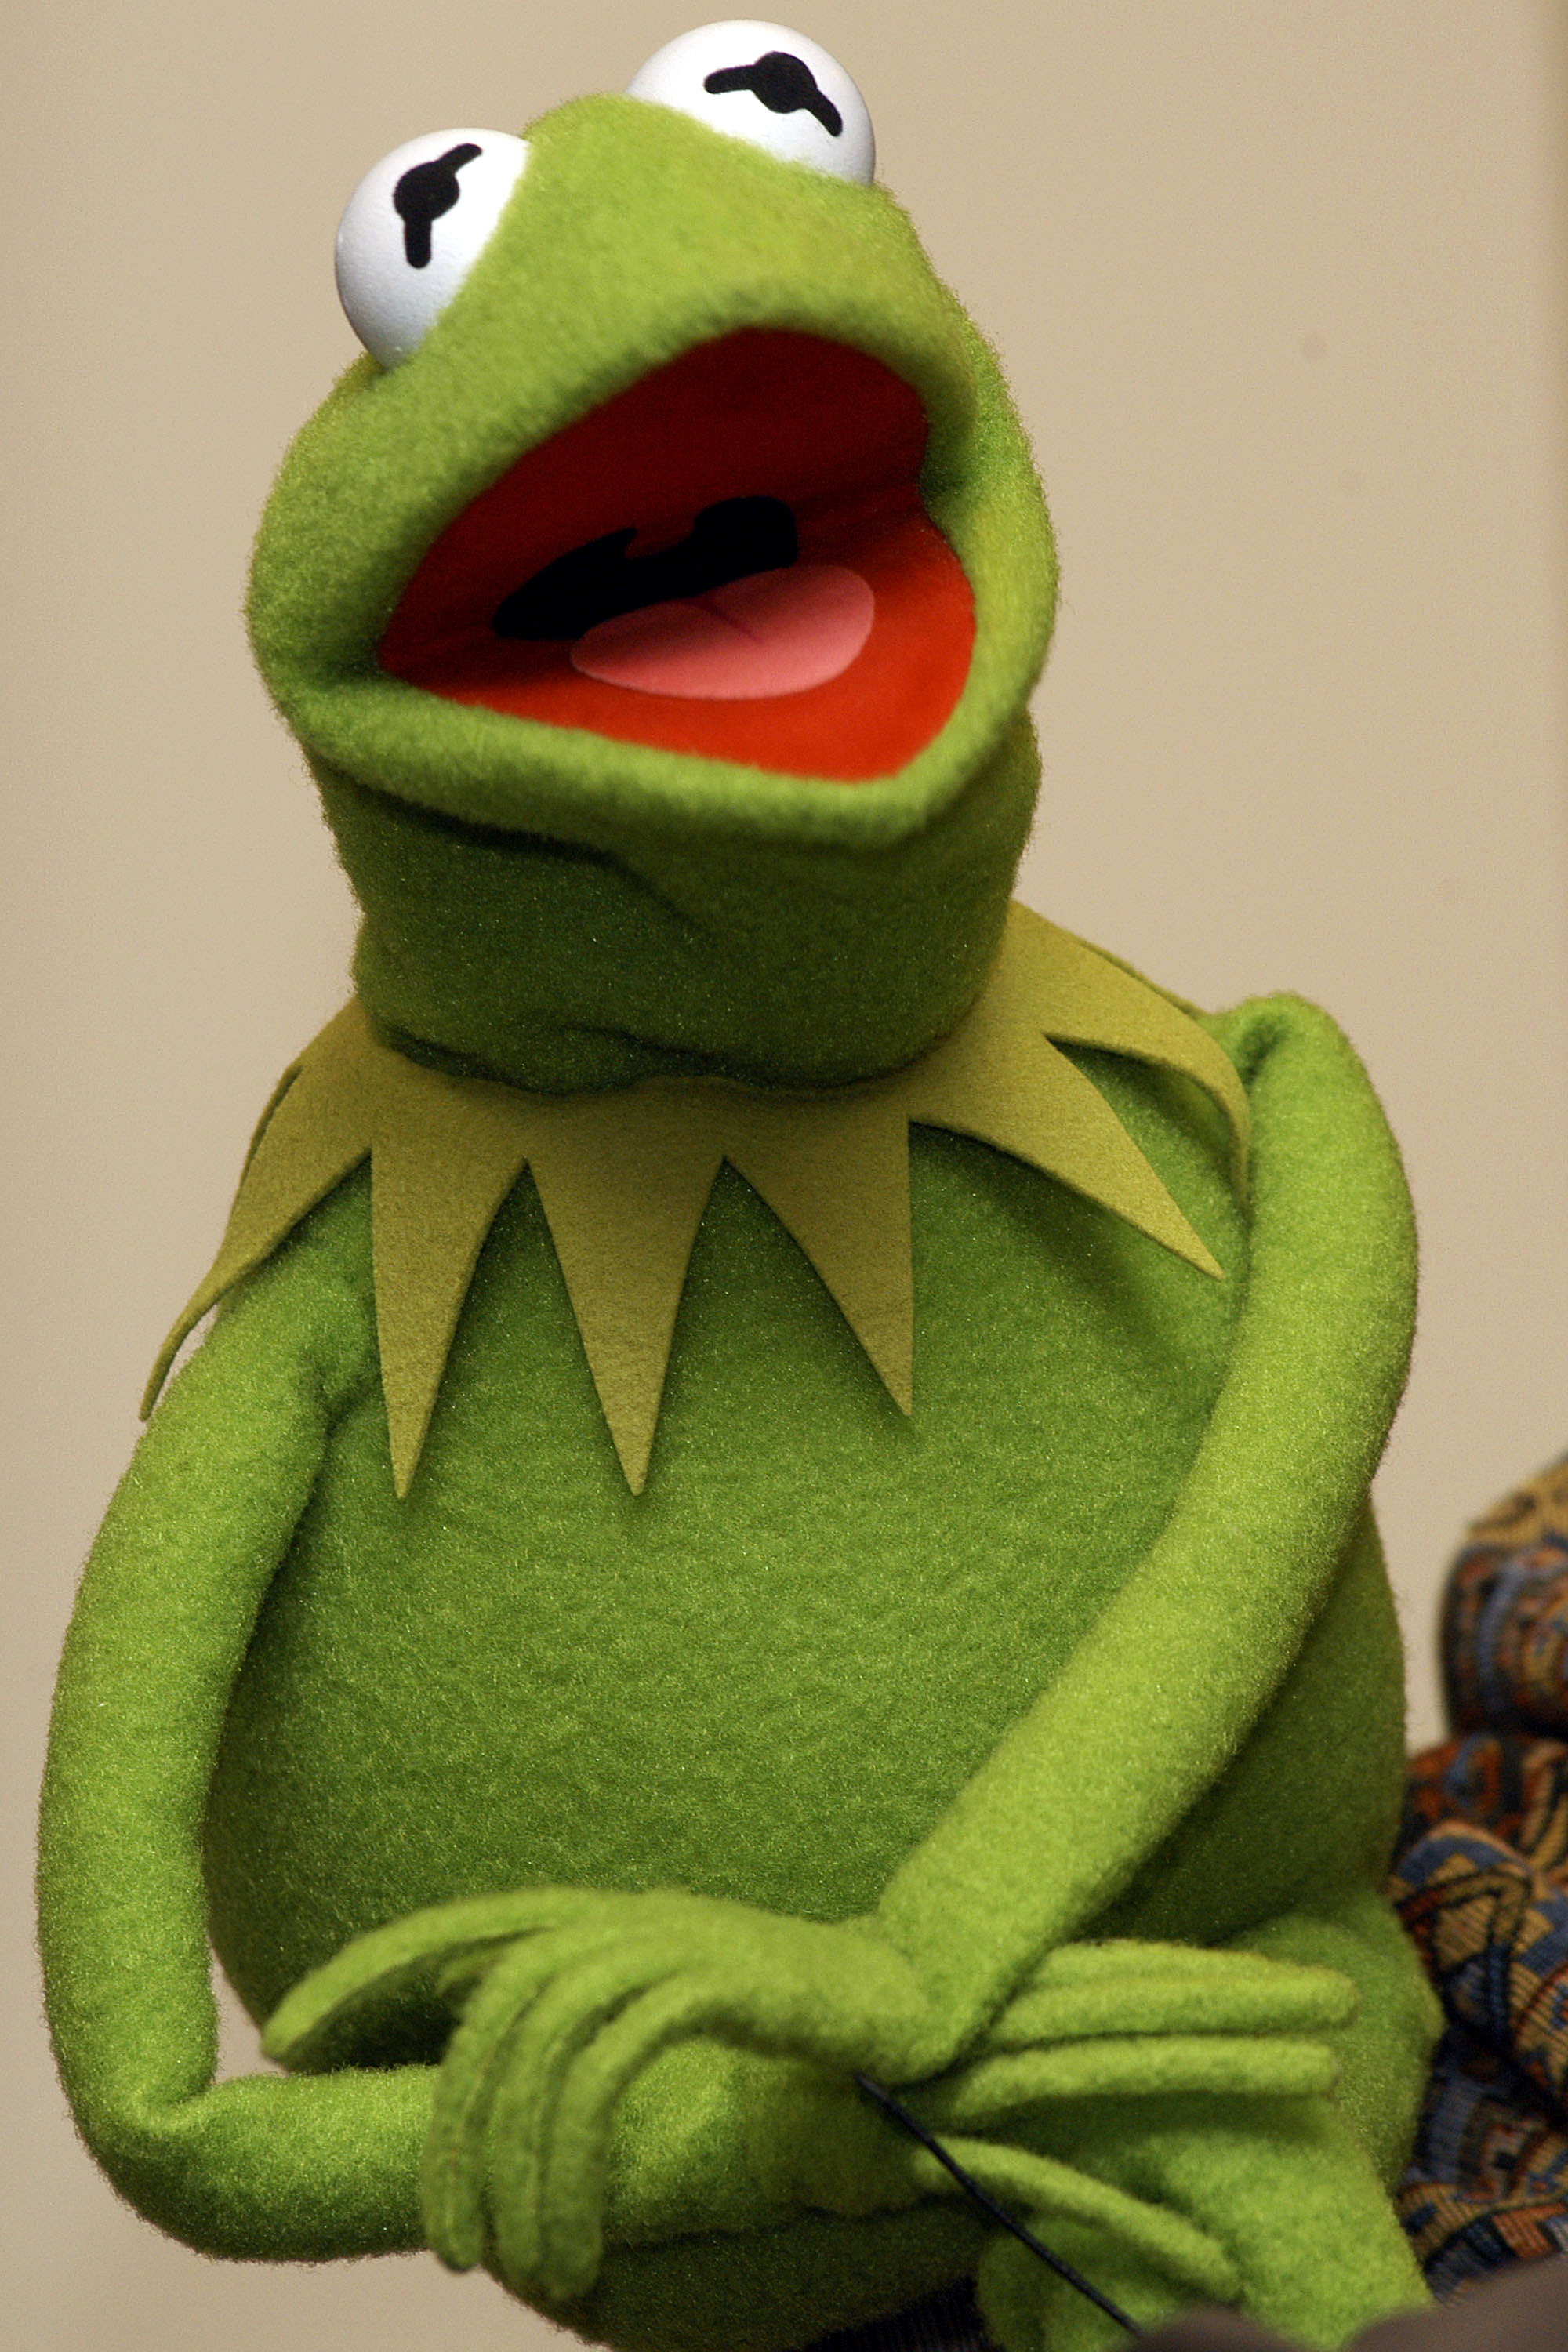 Kermit the Frog, the star of the Muppets, is shown here in a 2002 photo. - Kermit the Frog